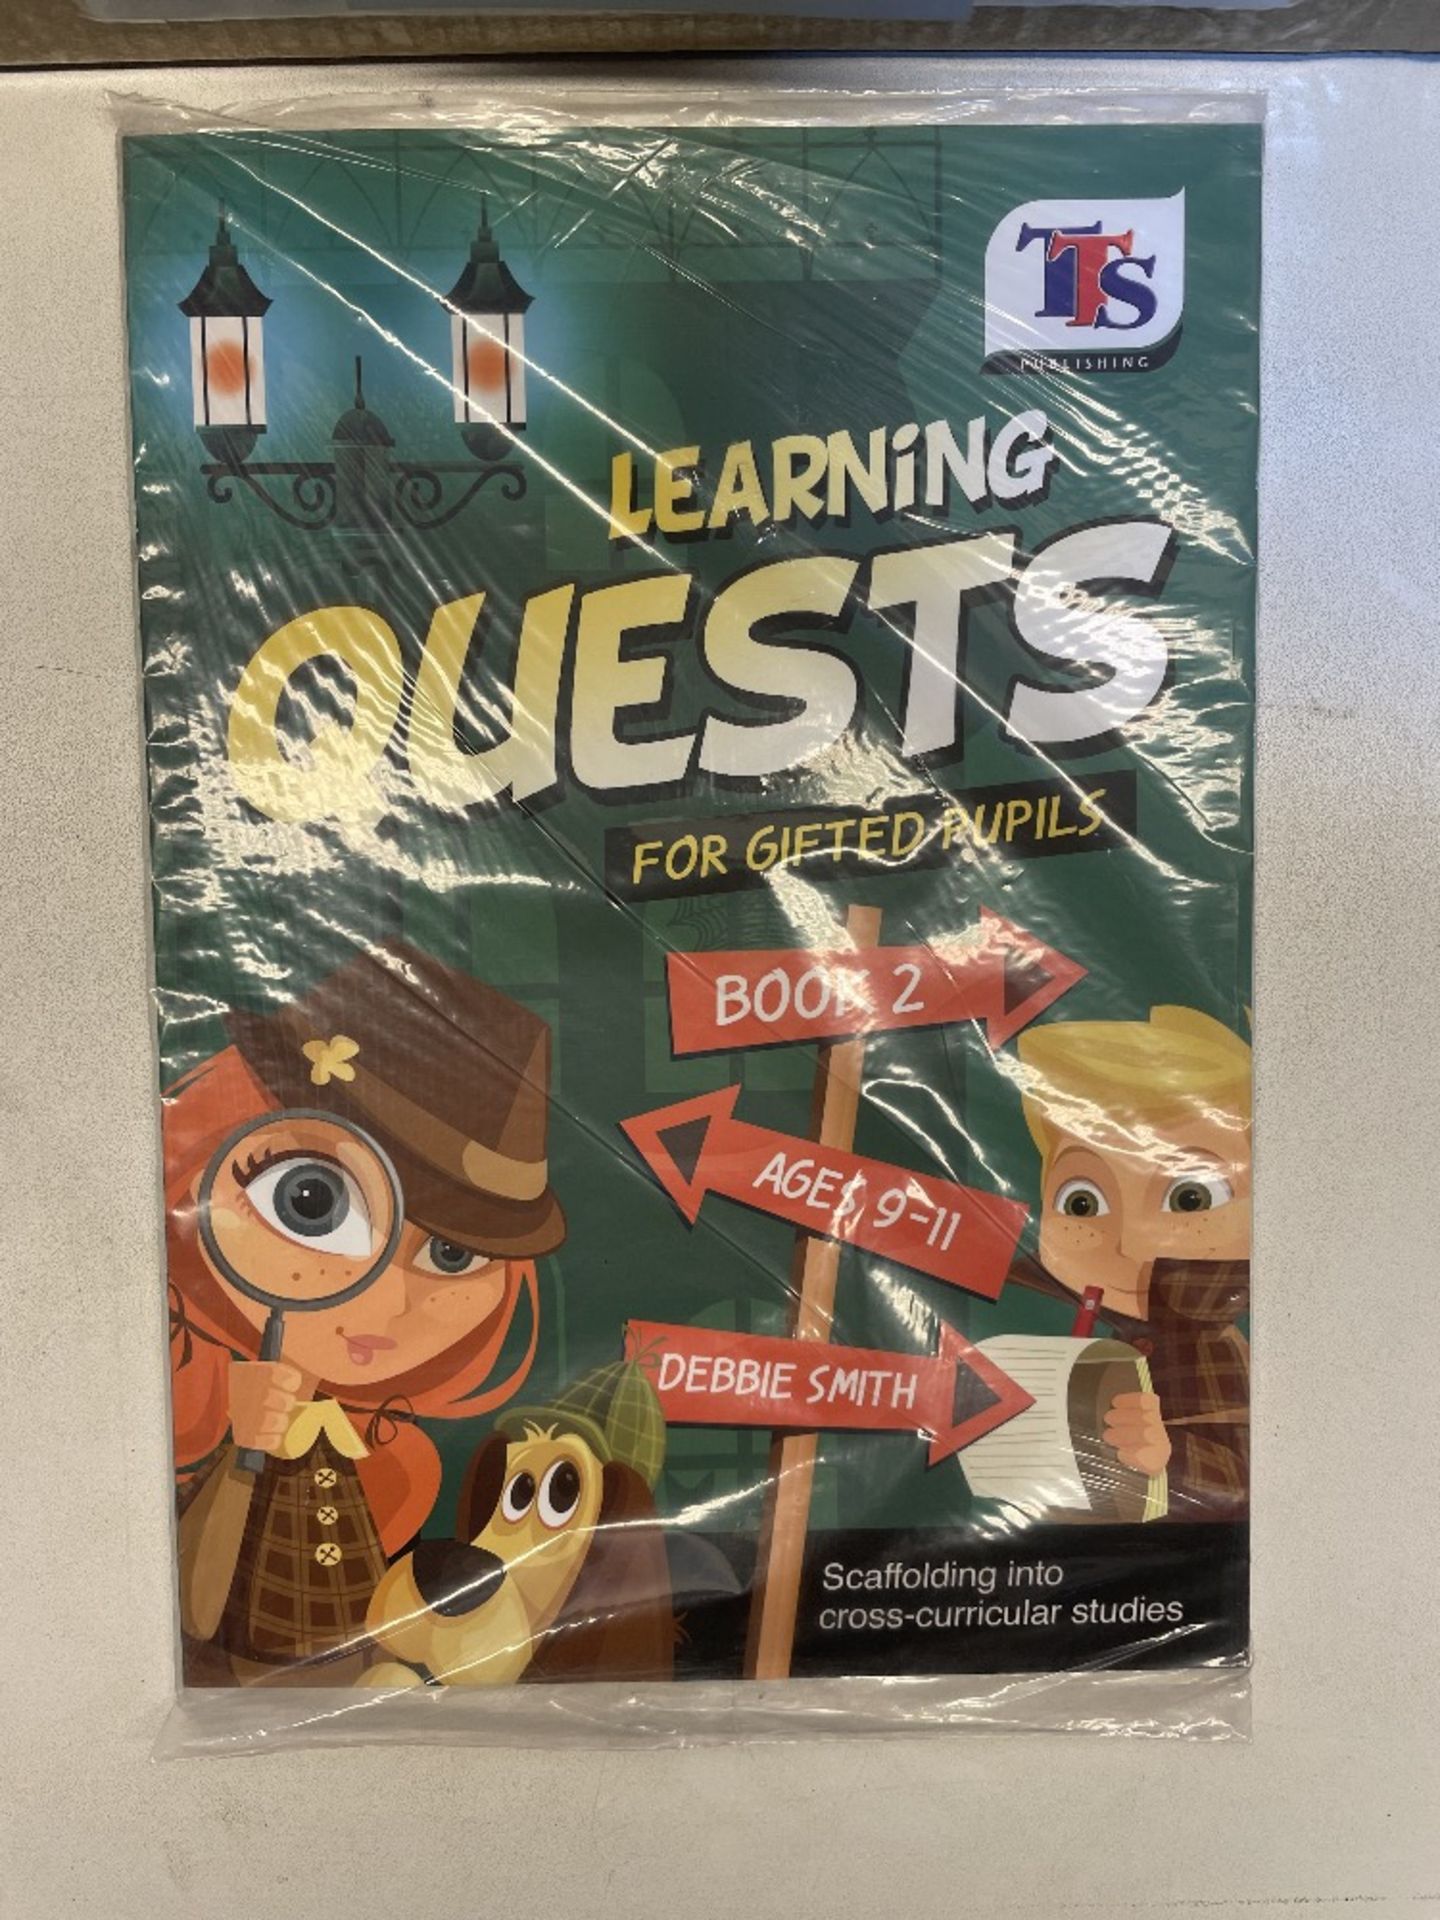 Approximately 355 x TTS Publishing PB00130 Age 9-11 'Learning Quests for Gifted Pupils' Book 2 Textb - Image 3 of 4